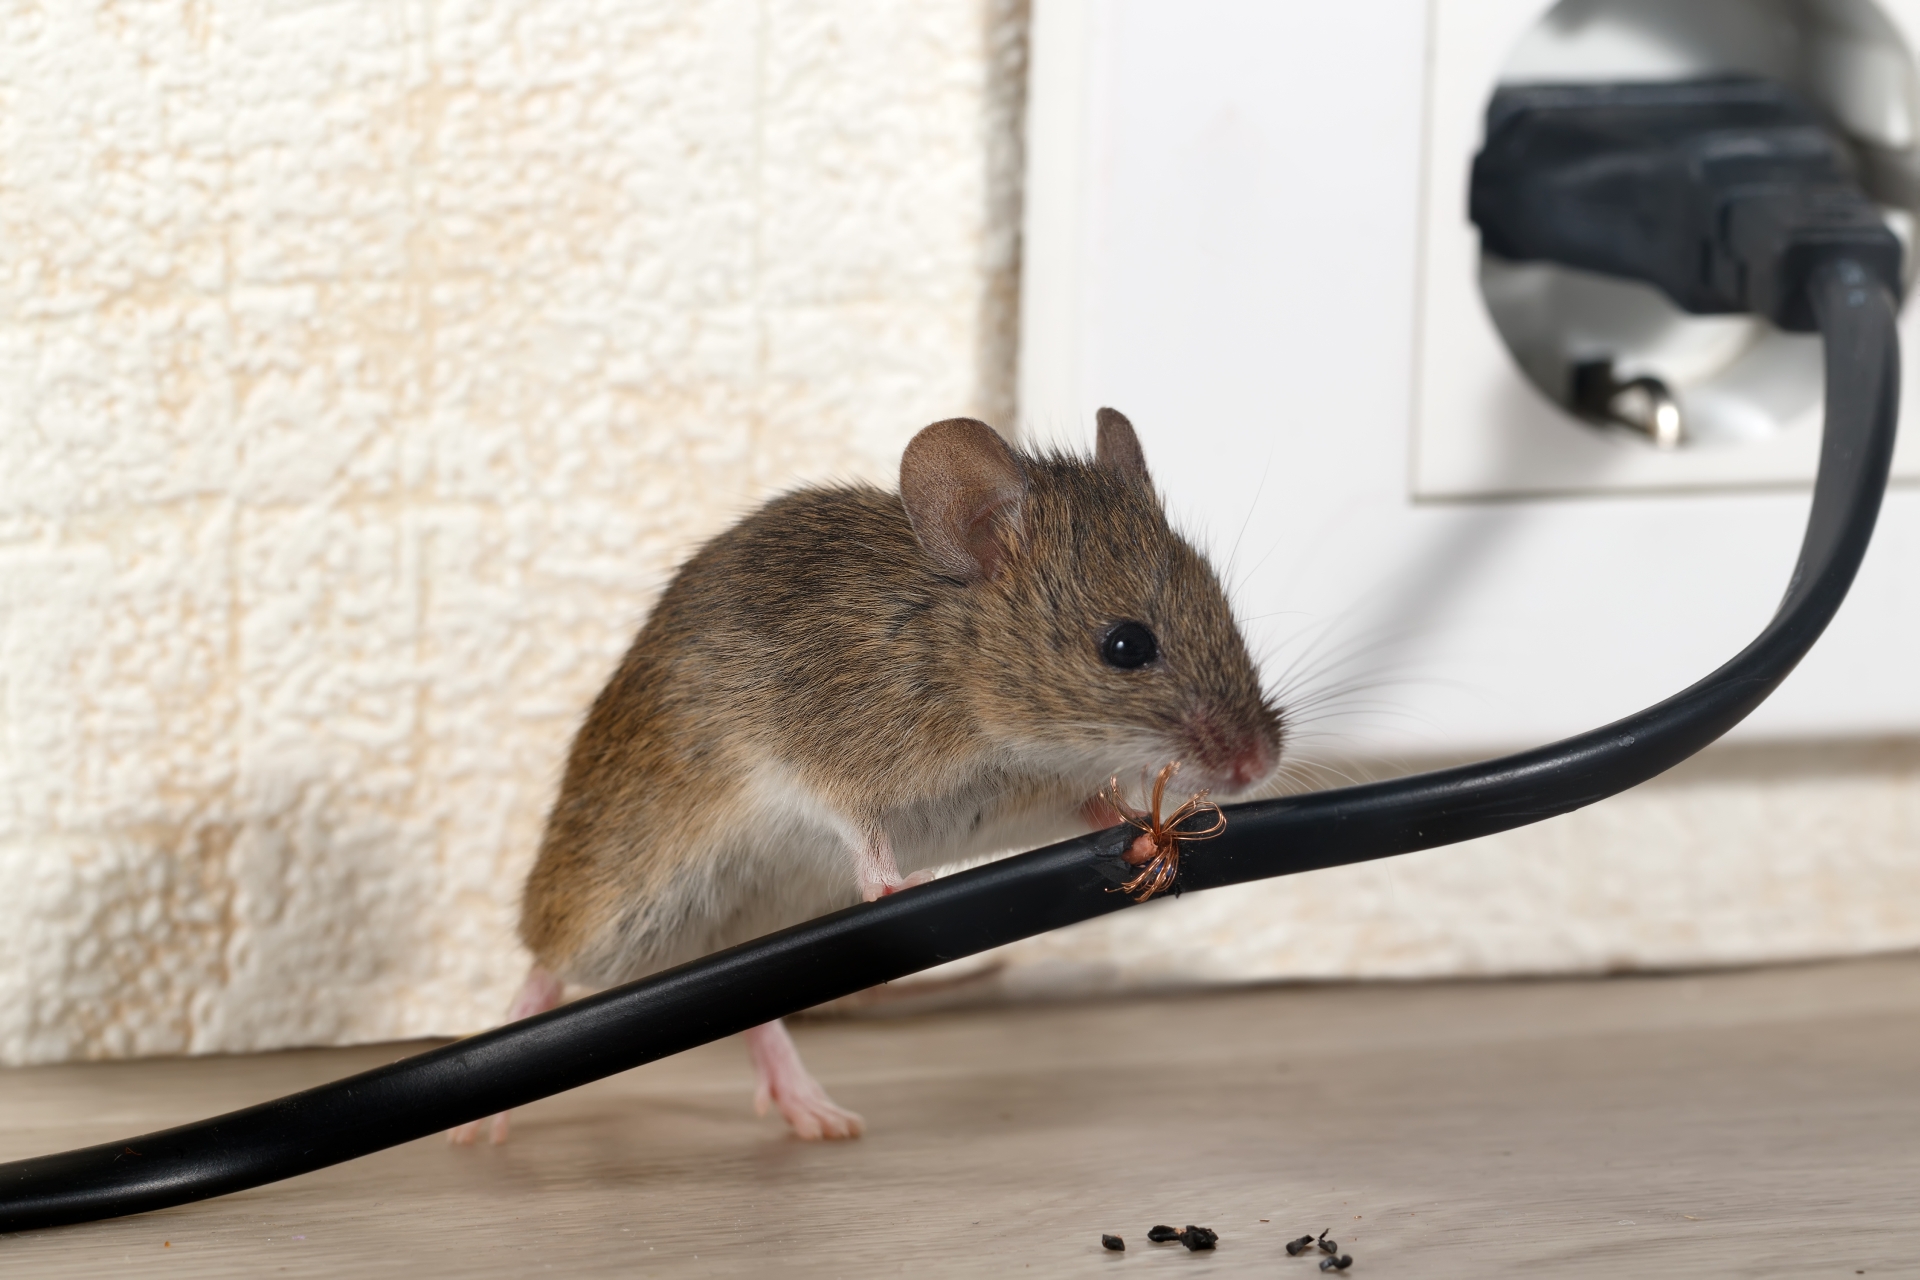 Mice Infestation, Pest Control in North Cheam, Stonecot Hill, SM3. Call Now 020 8166 9746